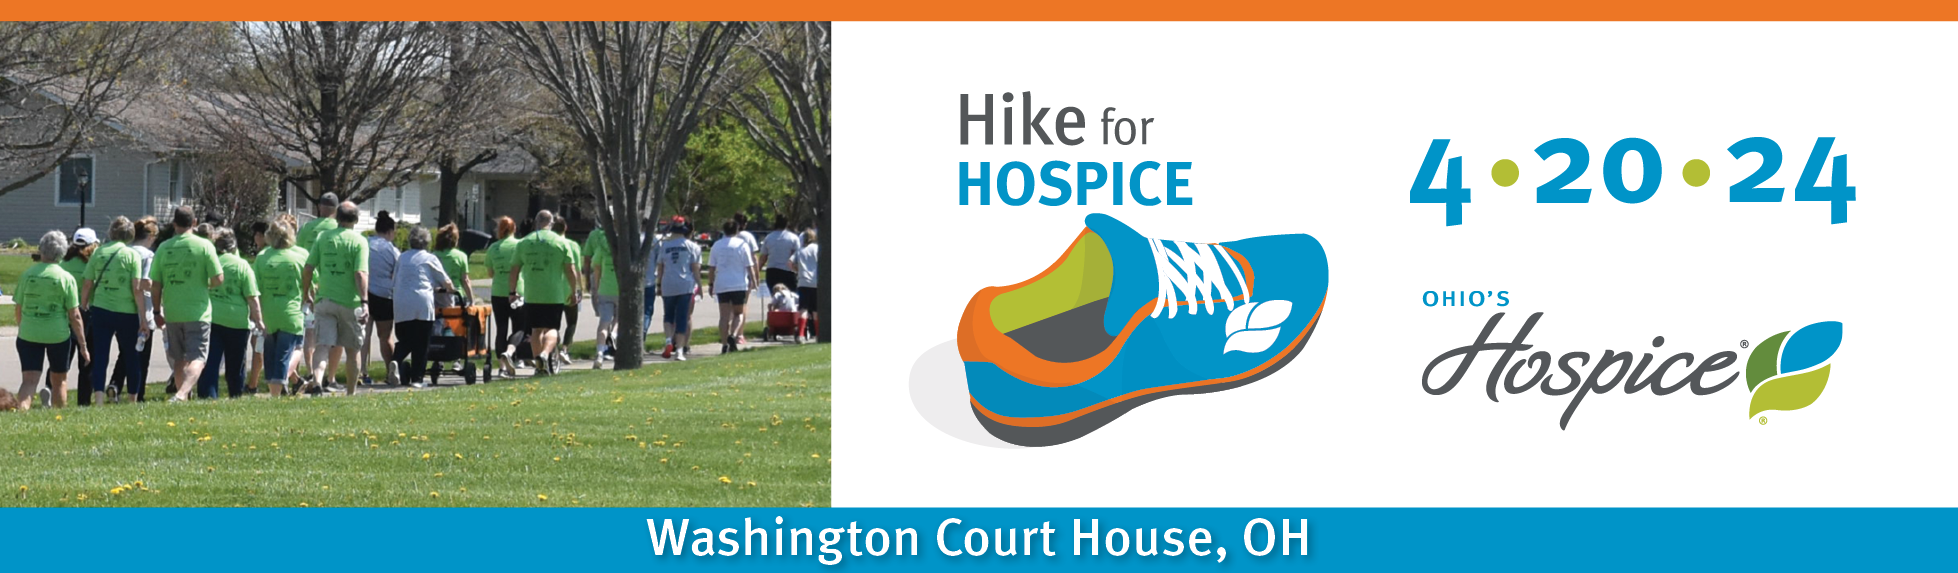 Ohio's Hospice of Fayette County Hike for Hospice 4.20.24 Washington Court House, OH